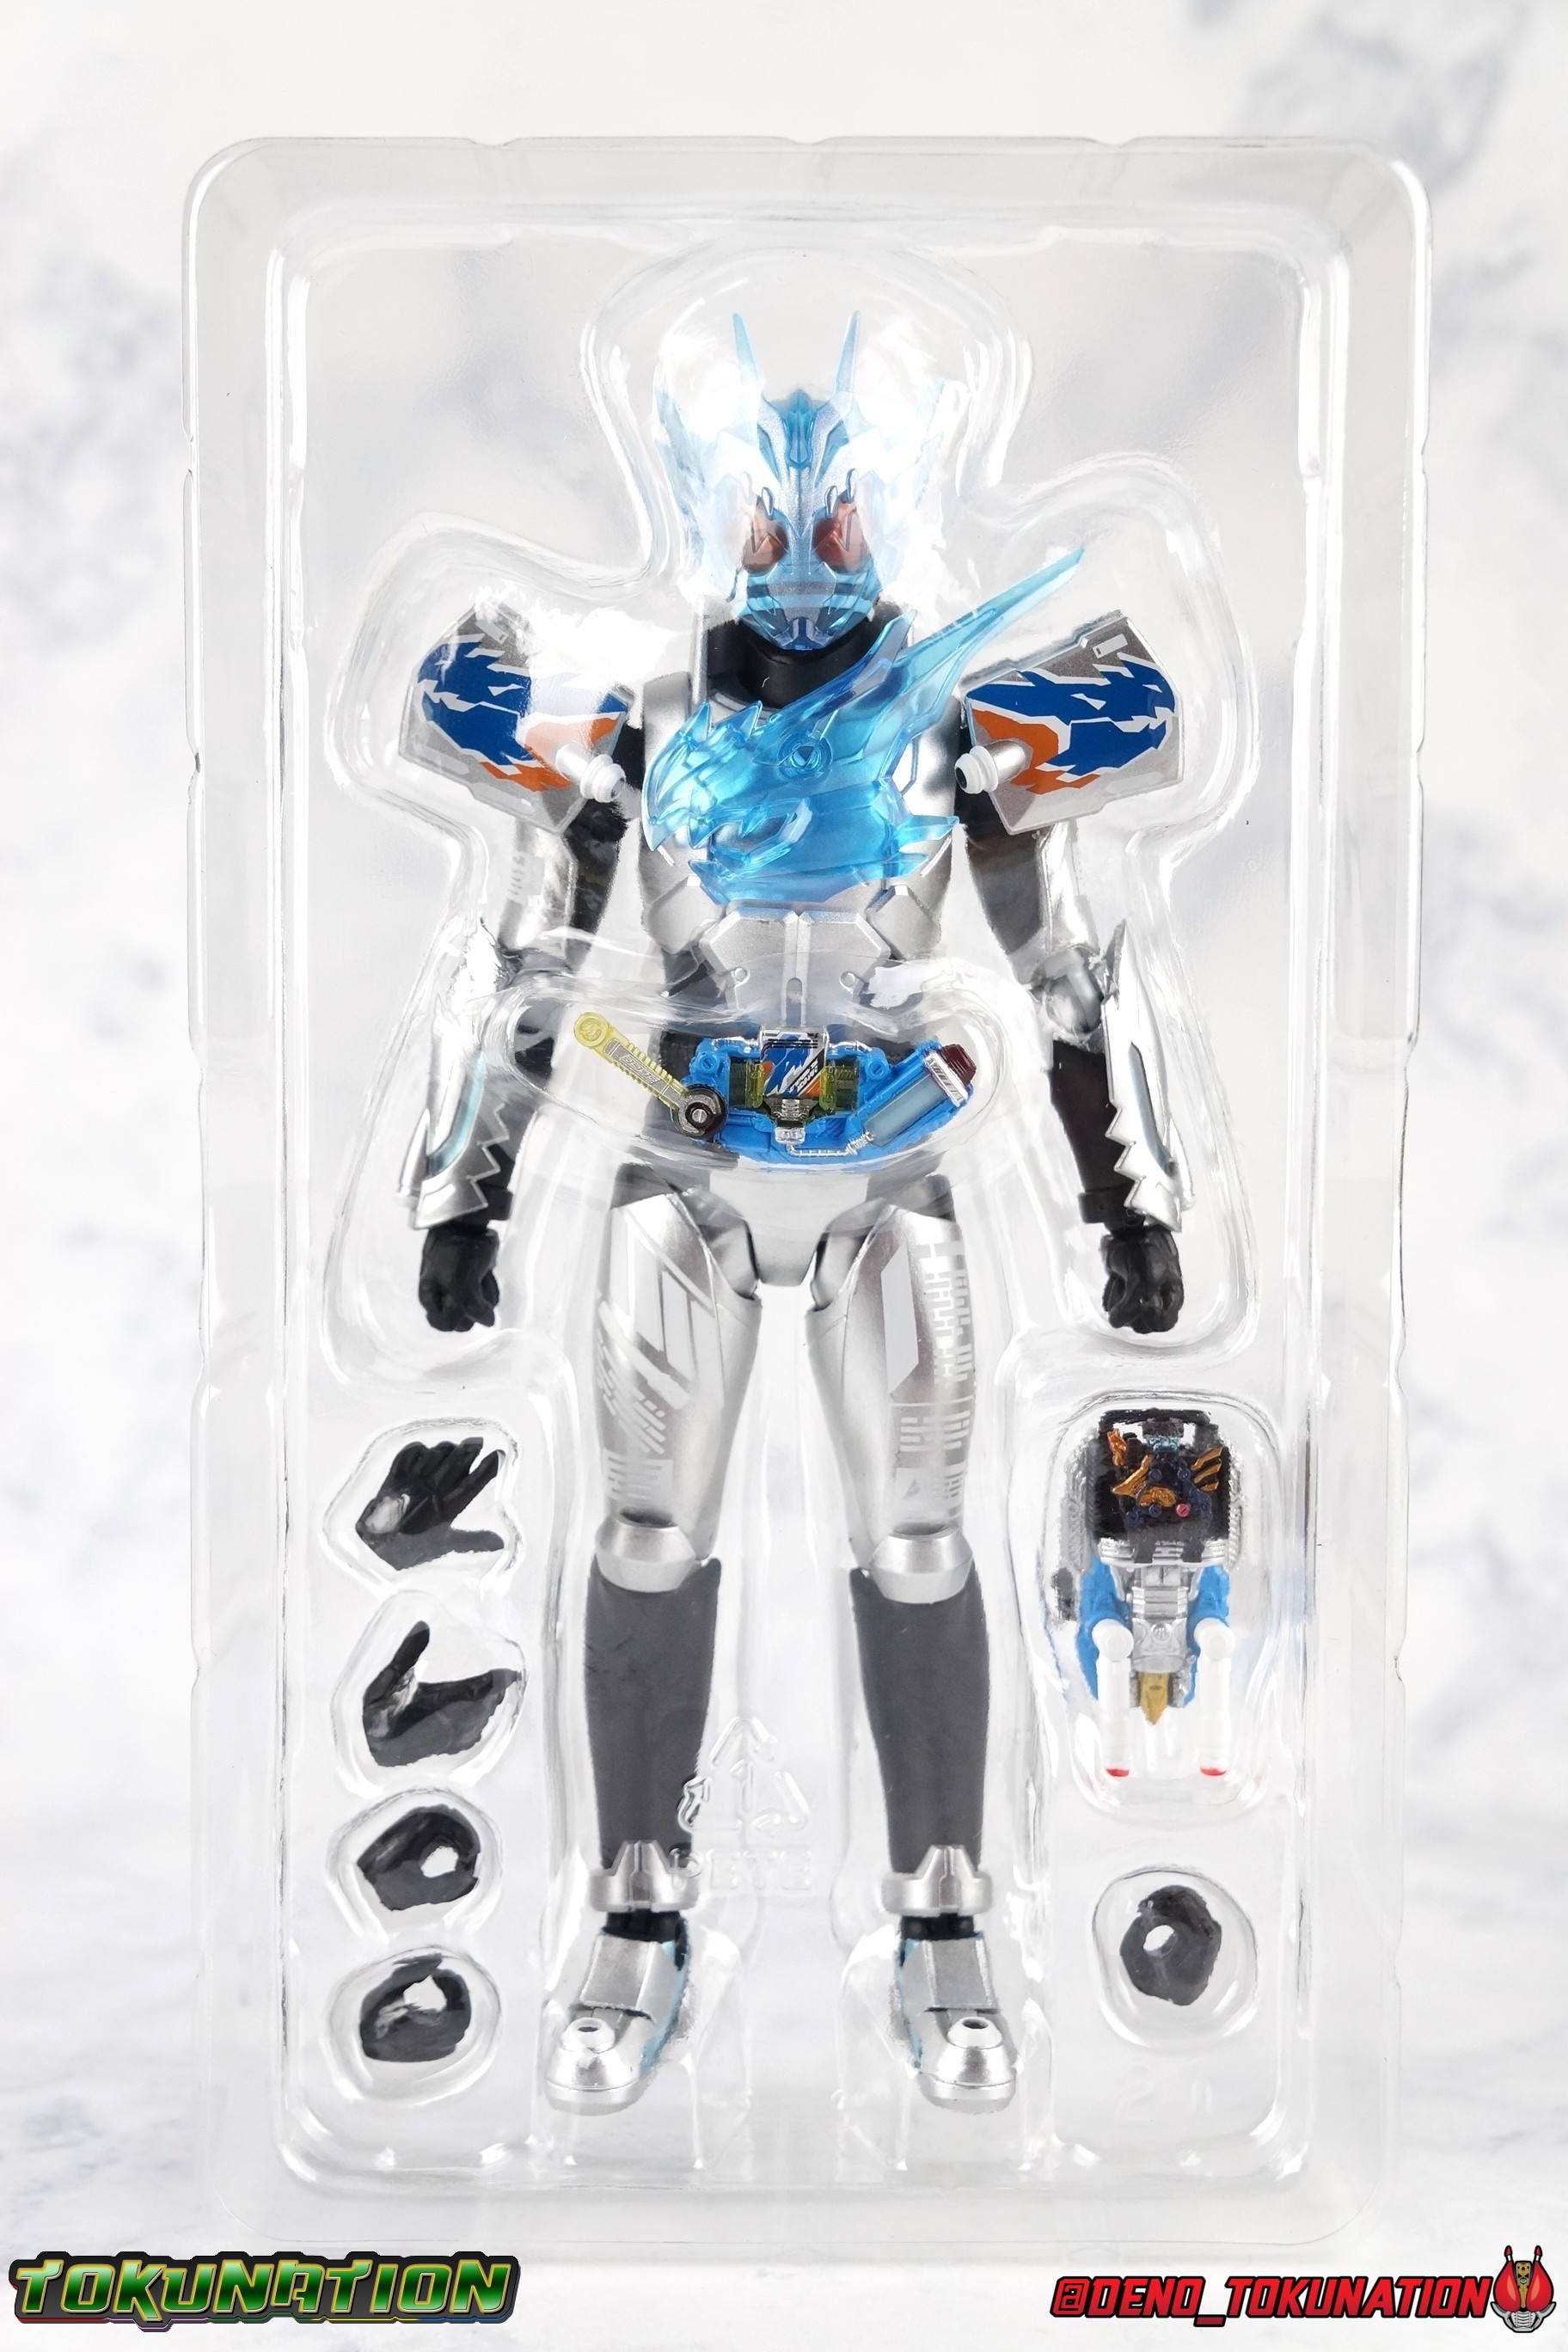 S.H. Figuarts Kamen Rider Cross-Z Charge Gallery - Tokunation